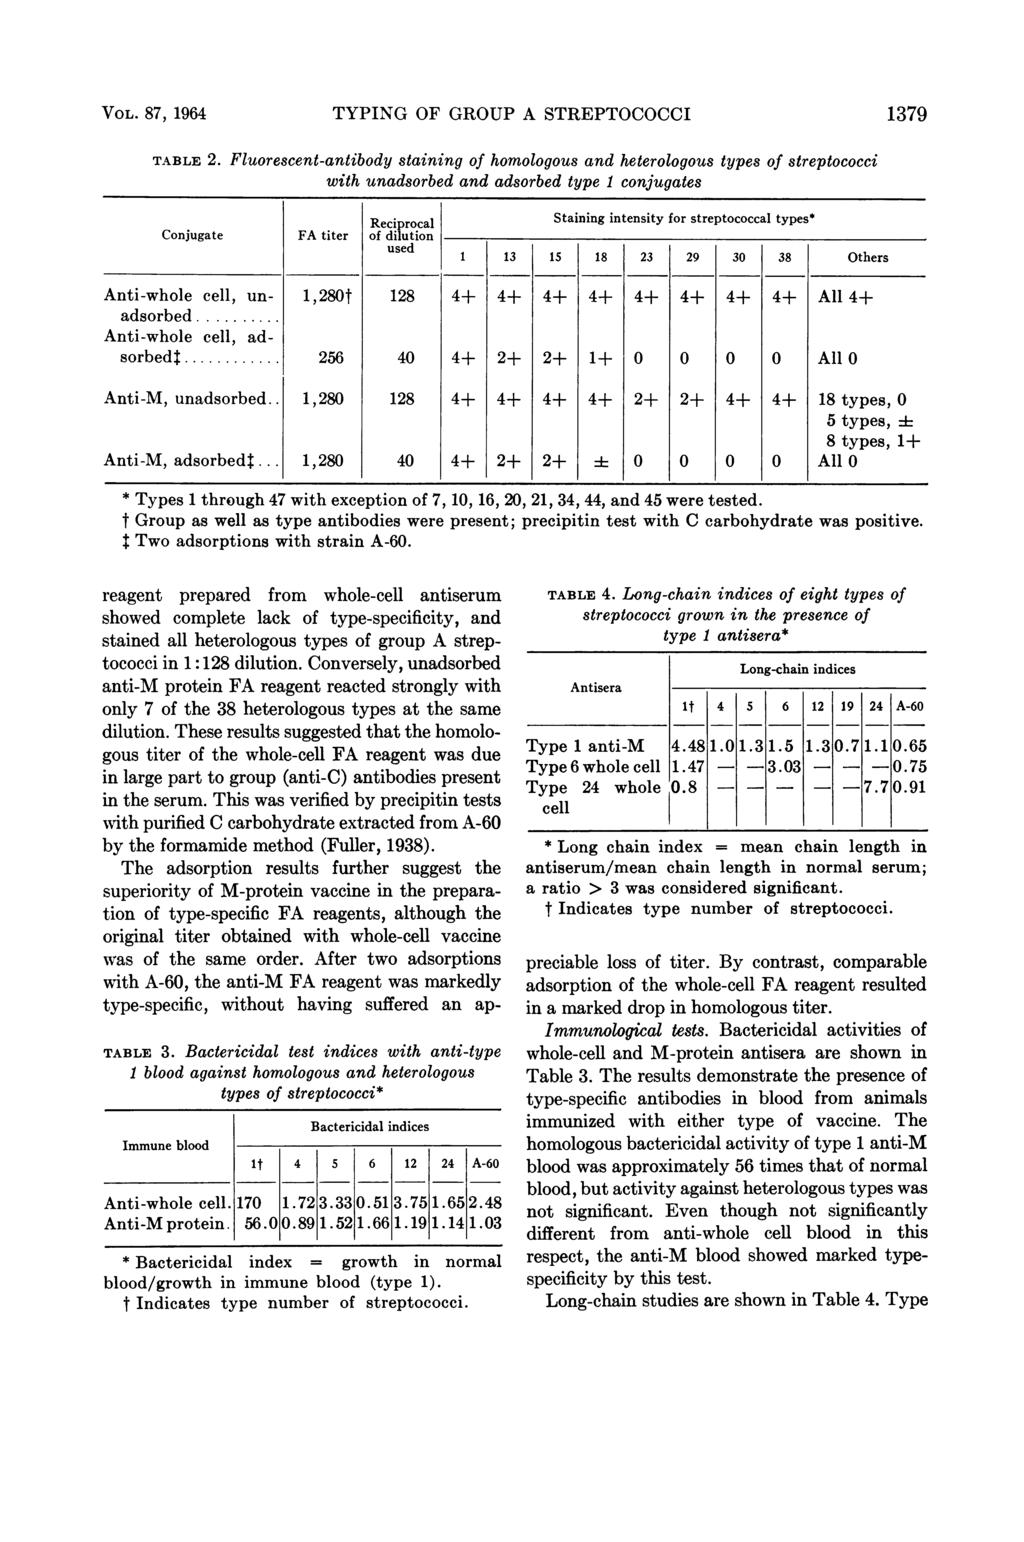 VOL. 87, 1964 TYPING OF GROUP A STREPTOCOCCI 1379 TABLE 2.